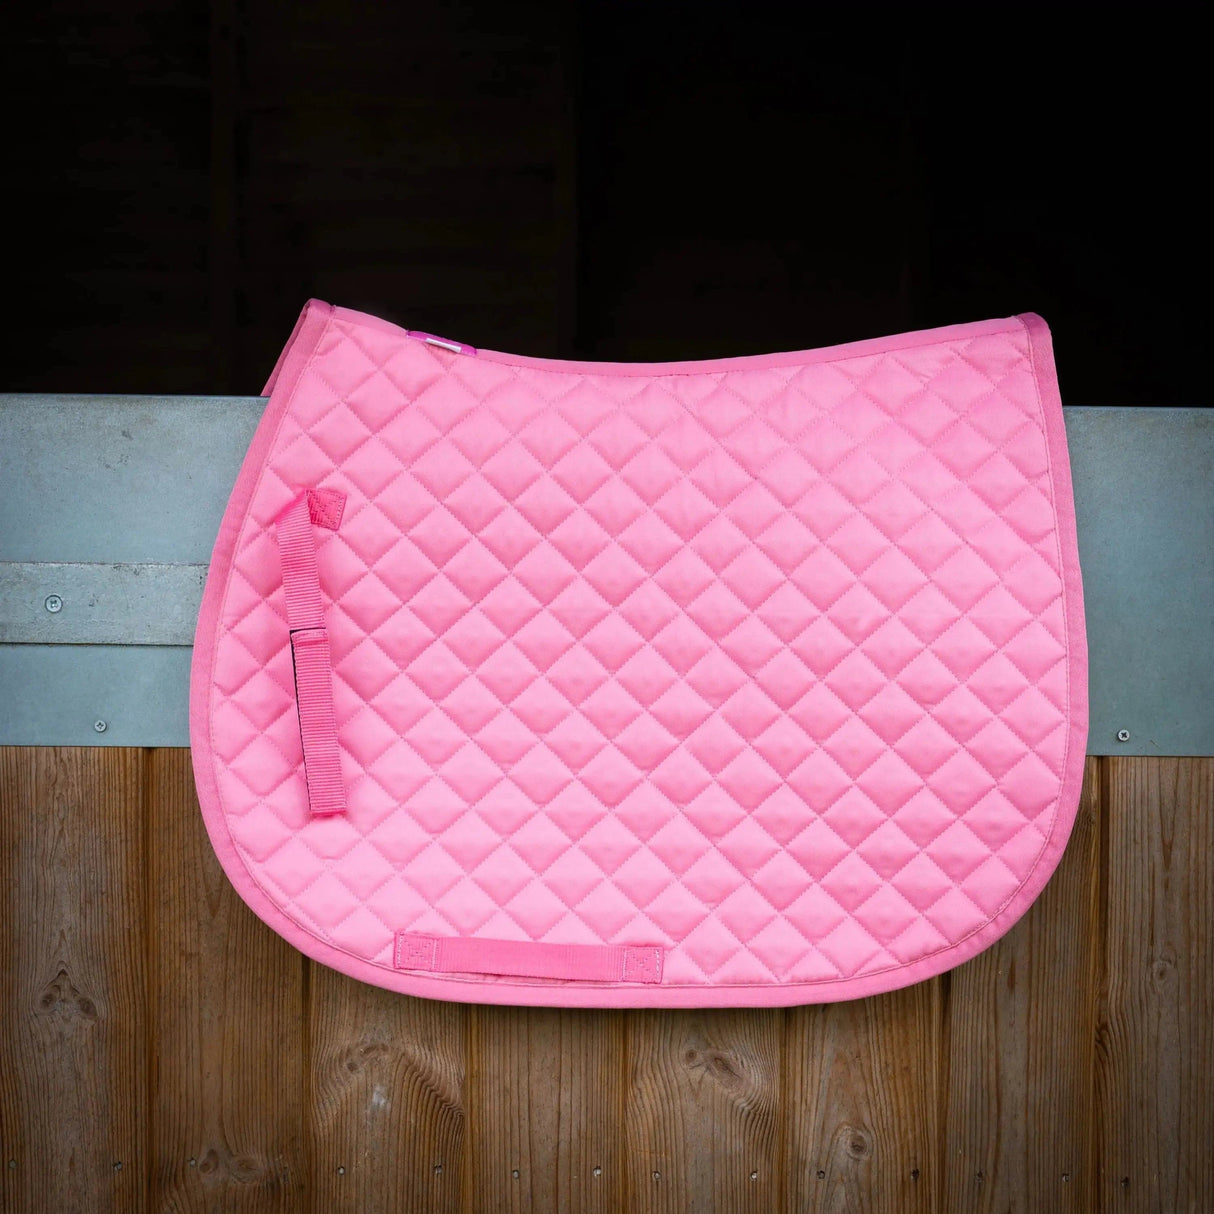 Gallop High Density Quilted Saddle Pad Pink Pony/Cob Gallop Equestrian Saddle Pads & Numnahs Barnstaple Equestrian Supplies